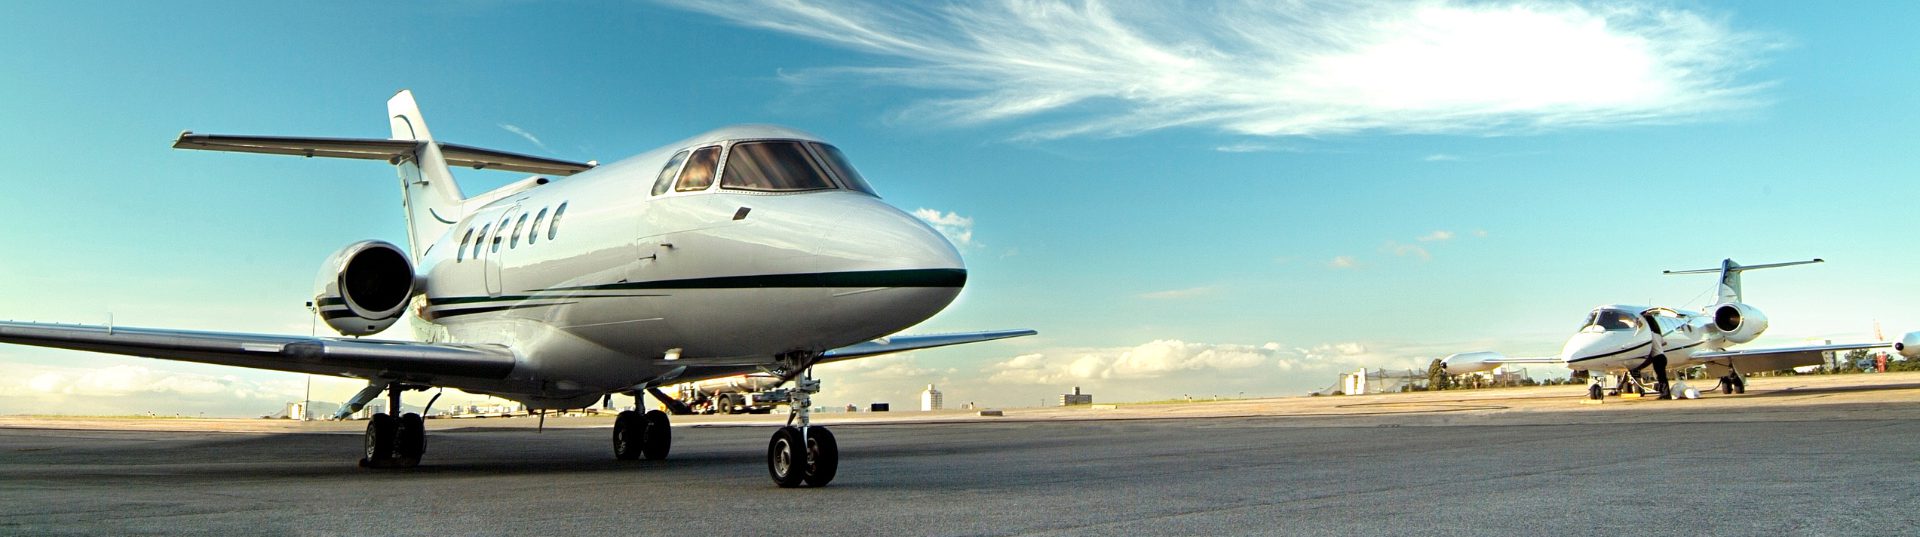 Hyperion Aviation, a leading private aircraft operator success story